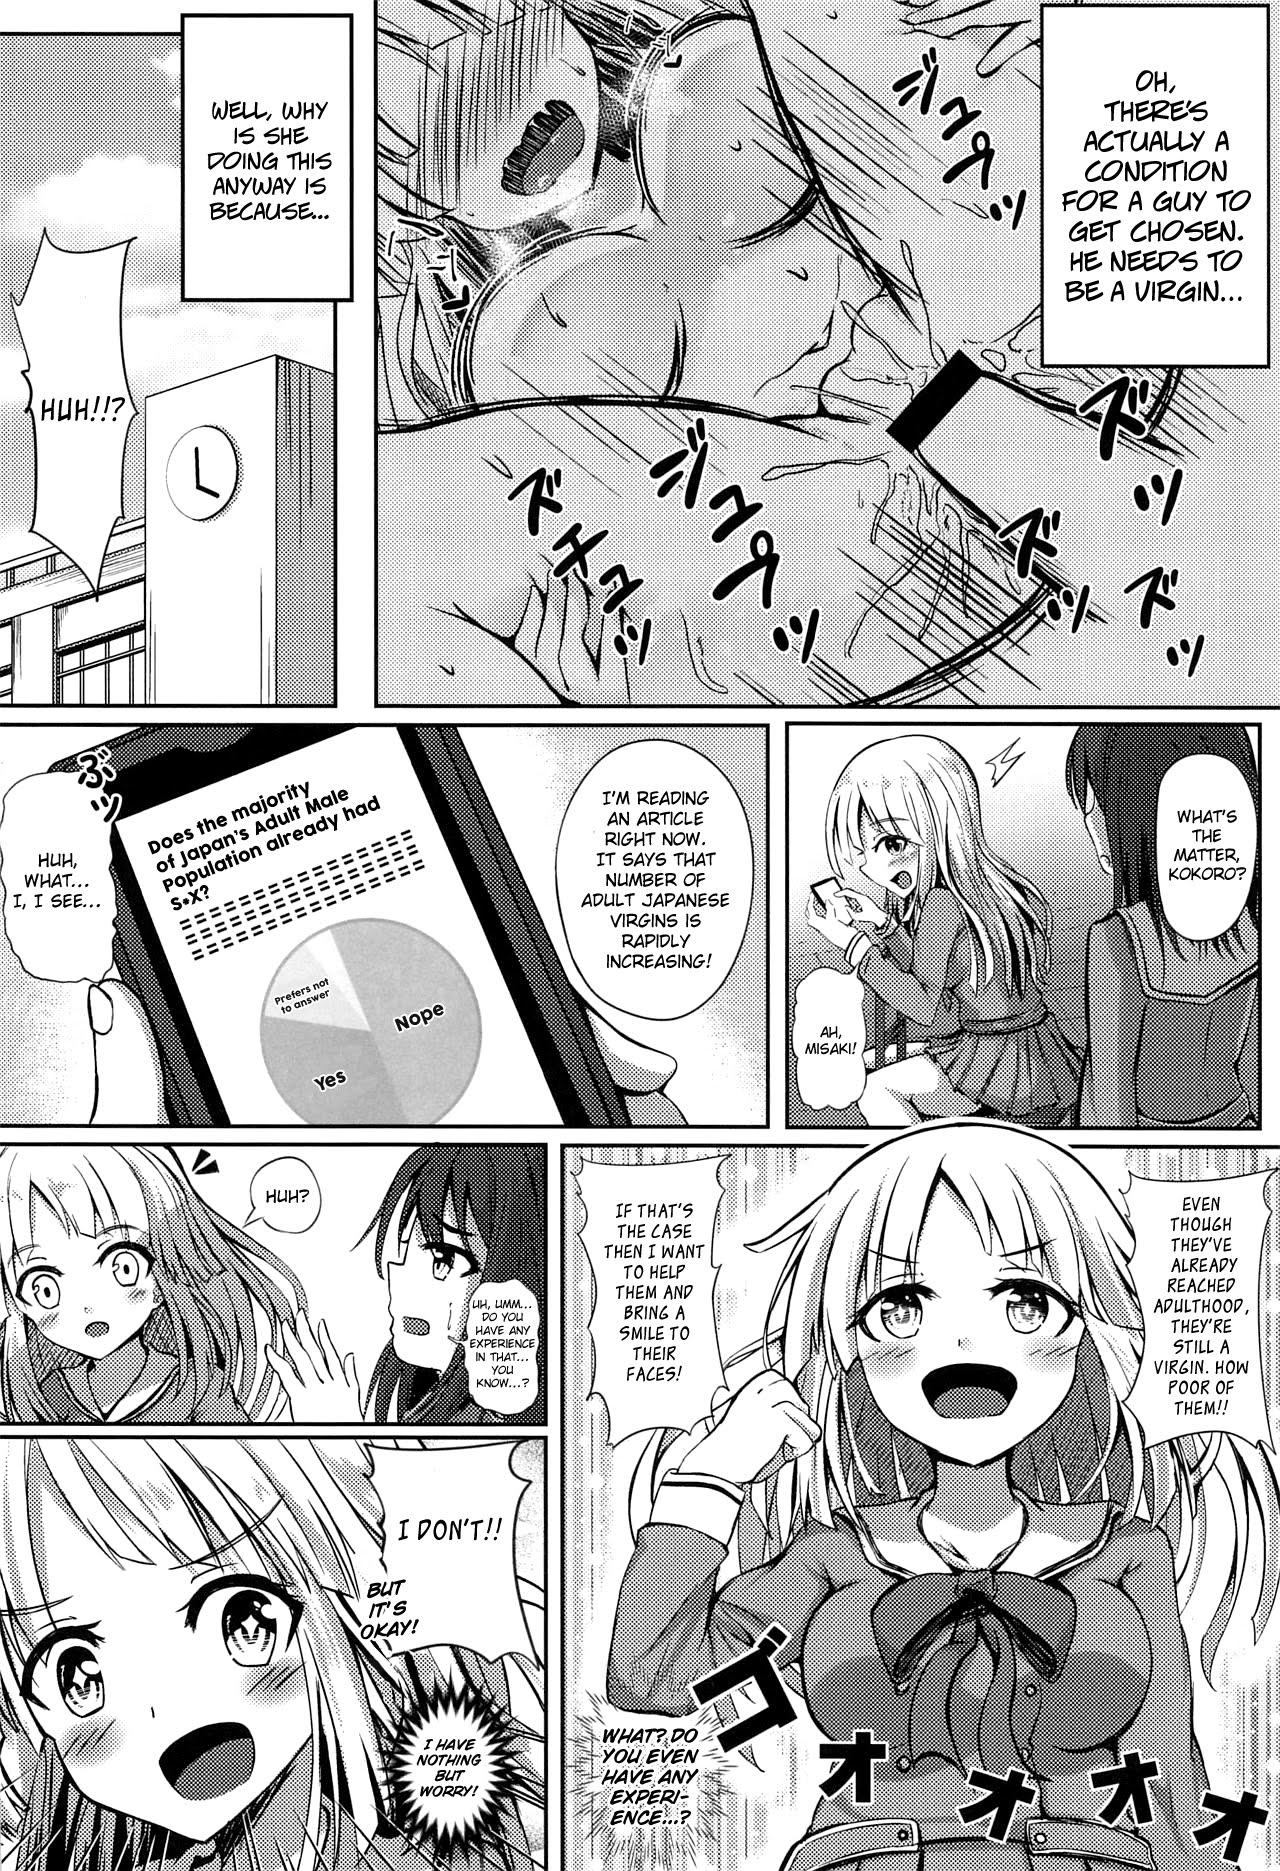 Gapes Gaping Asshole HALLO HAPPY DELIVERY - Bang dream Twink - Page 3